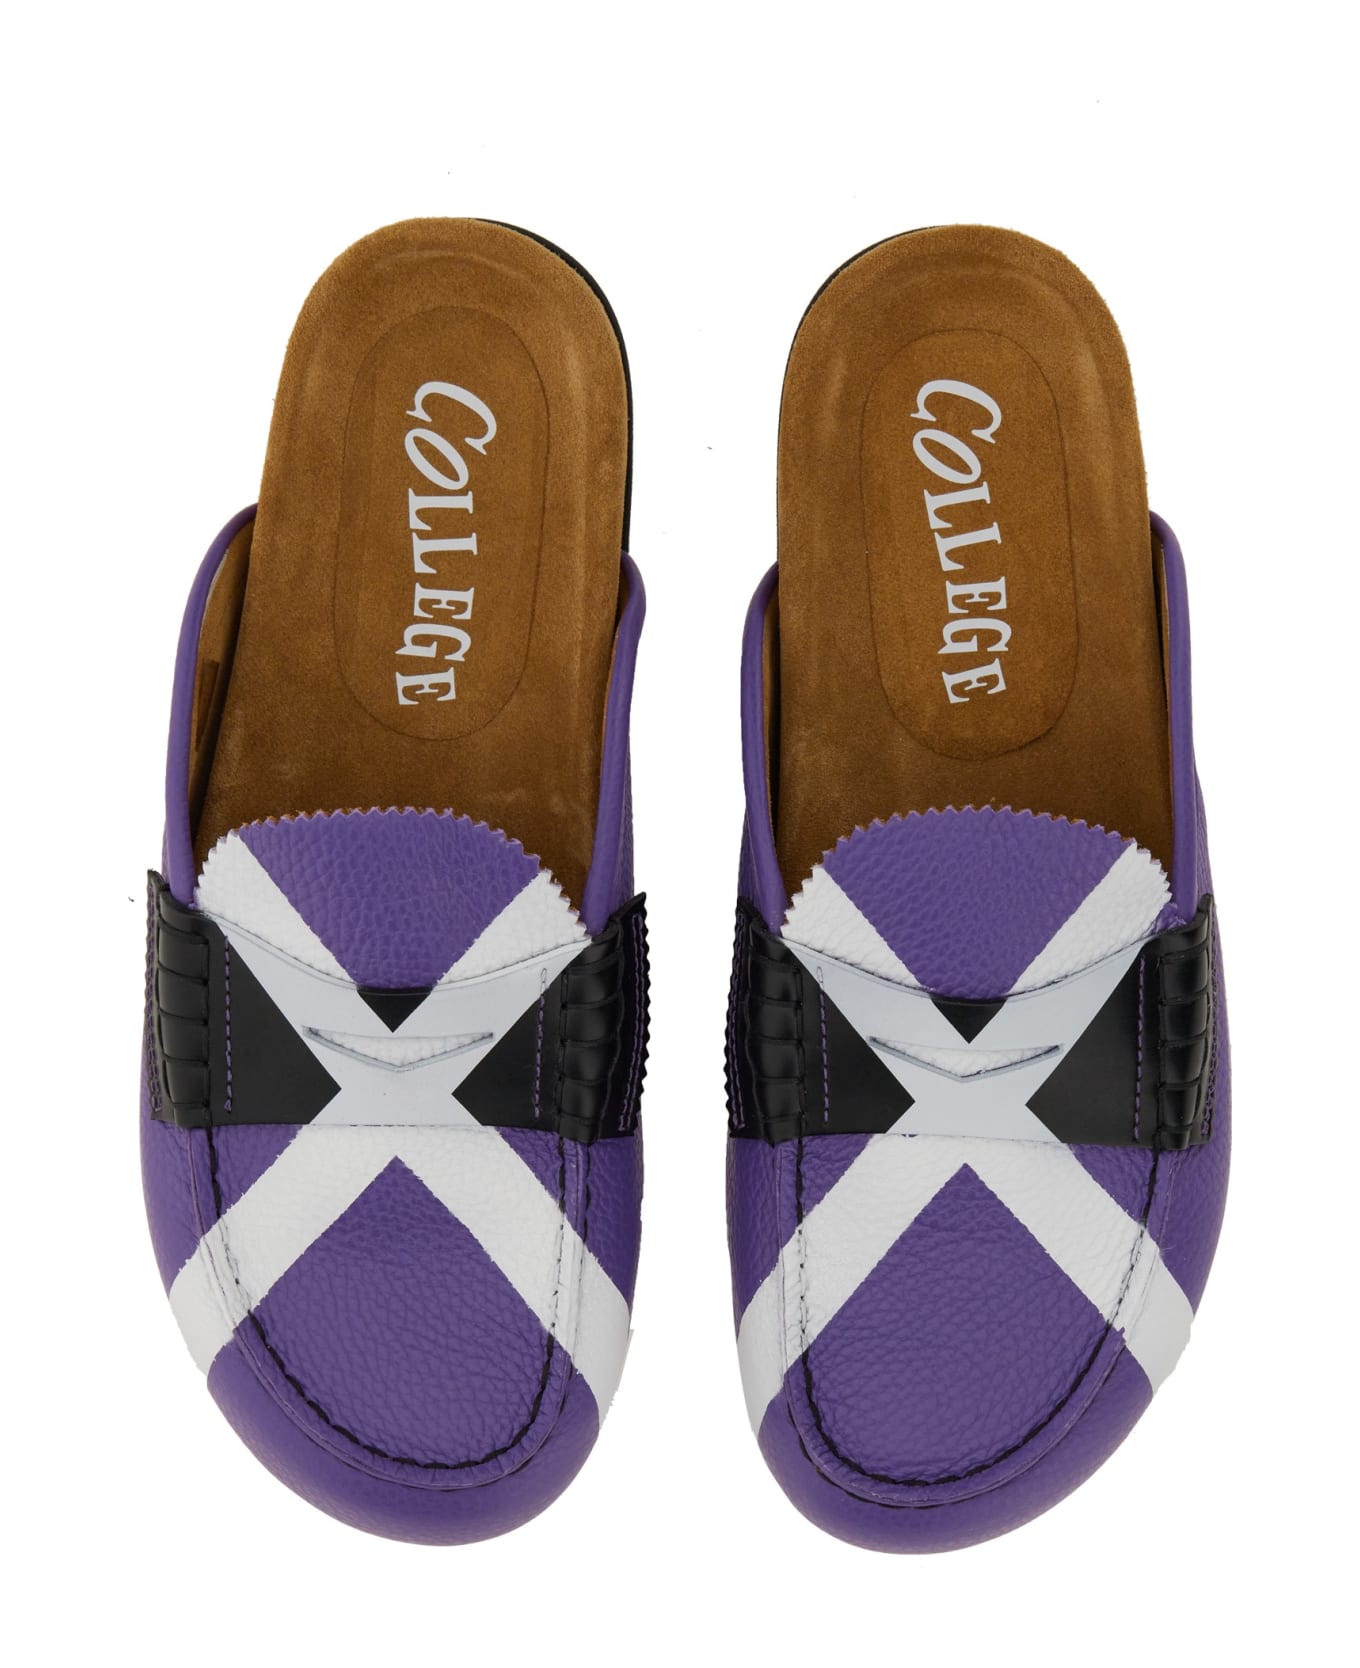 College Sabot With Iconic "x" - VIOLA